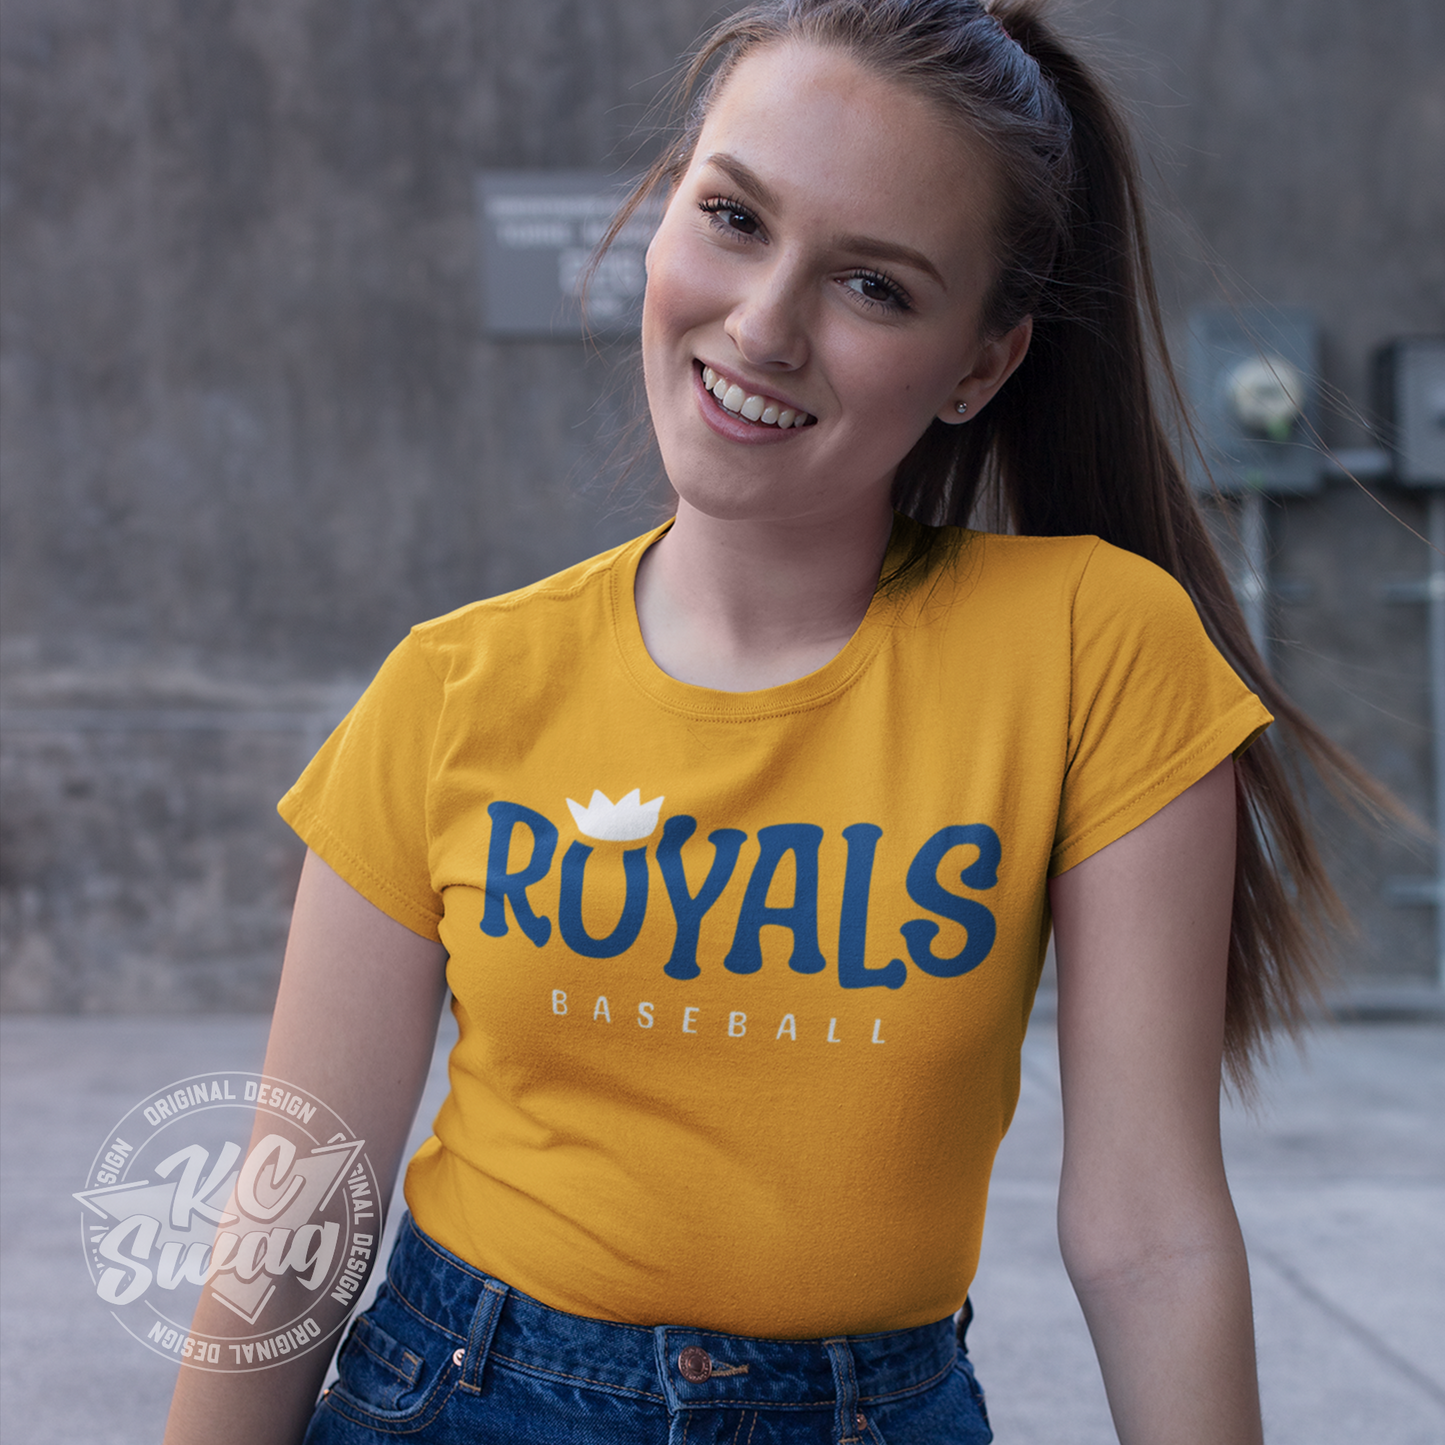 KC Swag - Kansas City Royals, Royals O-Crown design on gold unisex t-shirt worn by female model sitting in front of a concrete wall in an urban alley